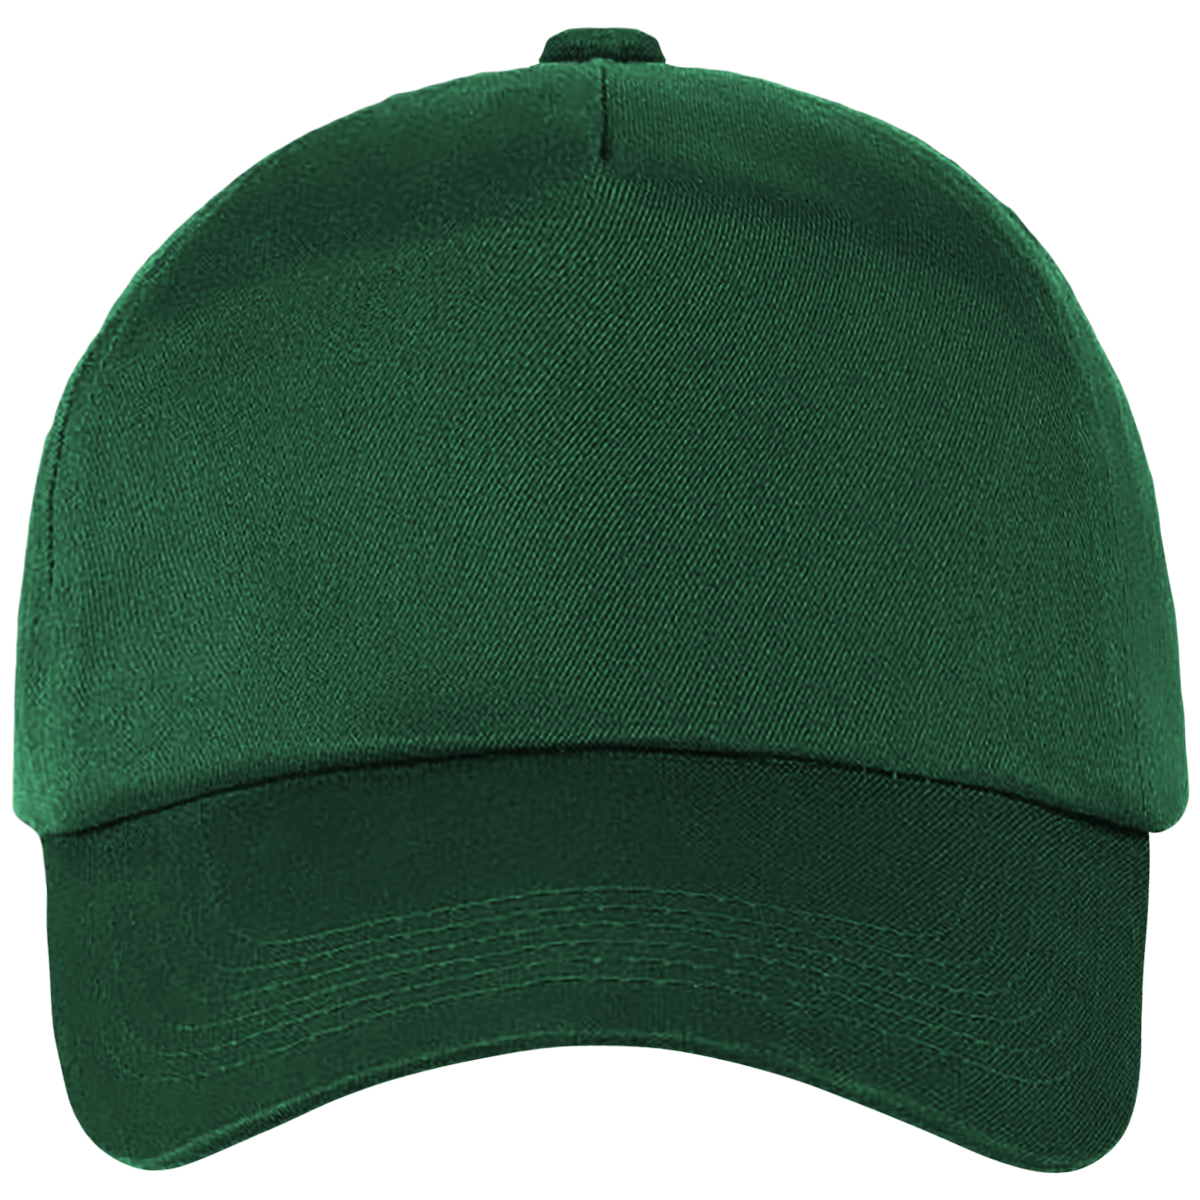 Customizable Fashion Cap In Embroidery And Printing Bottle Green